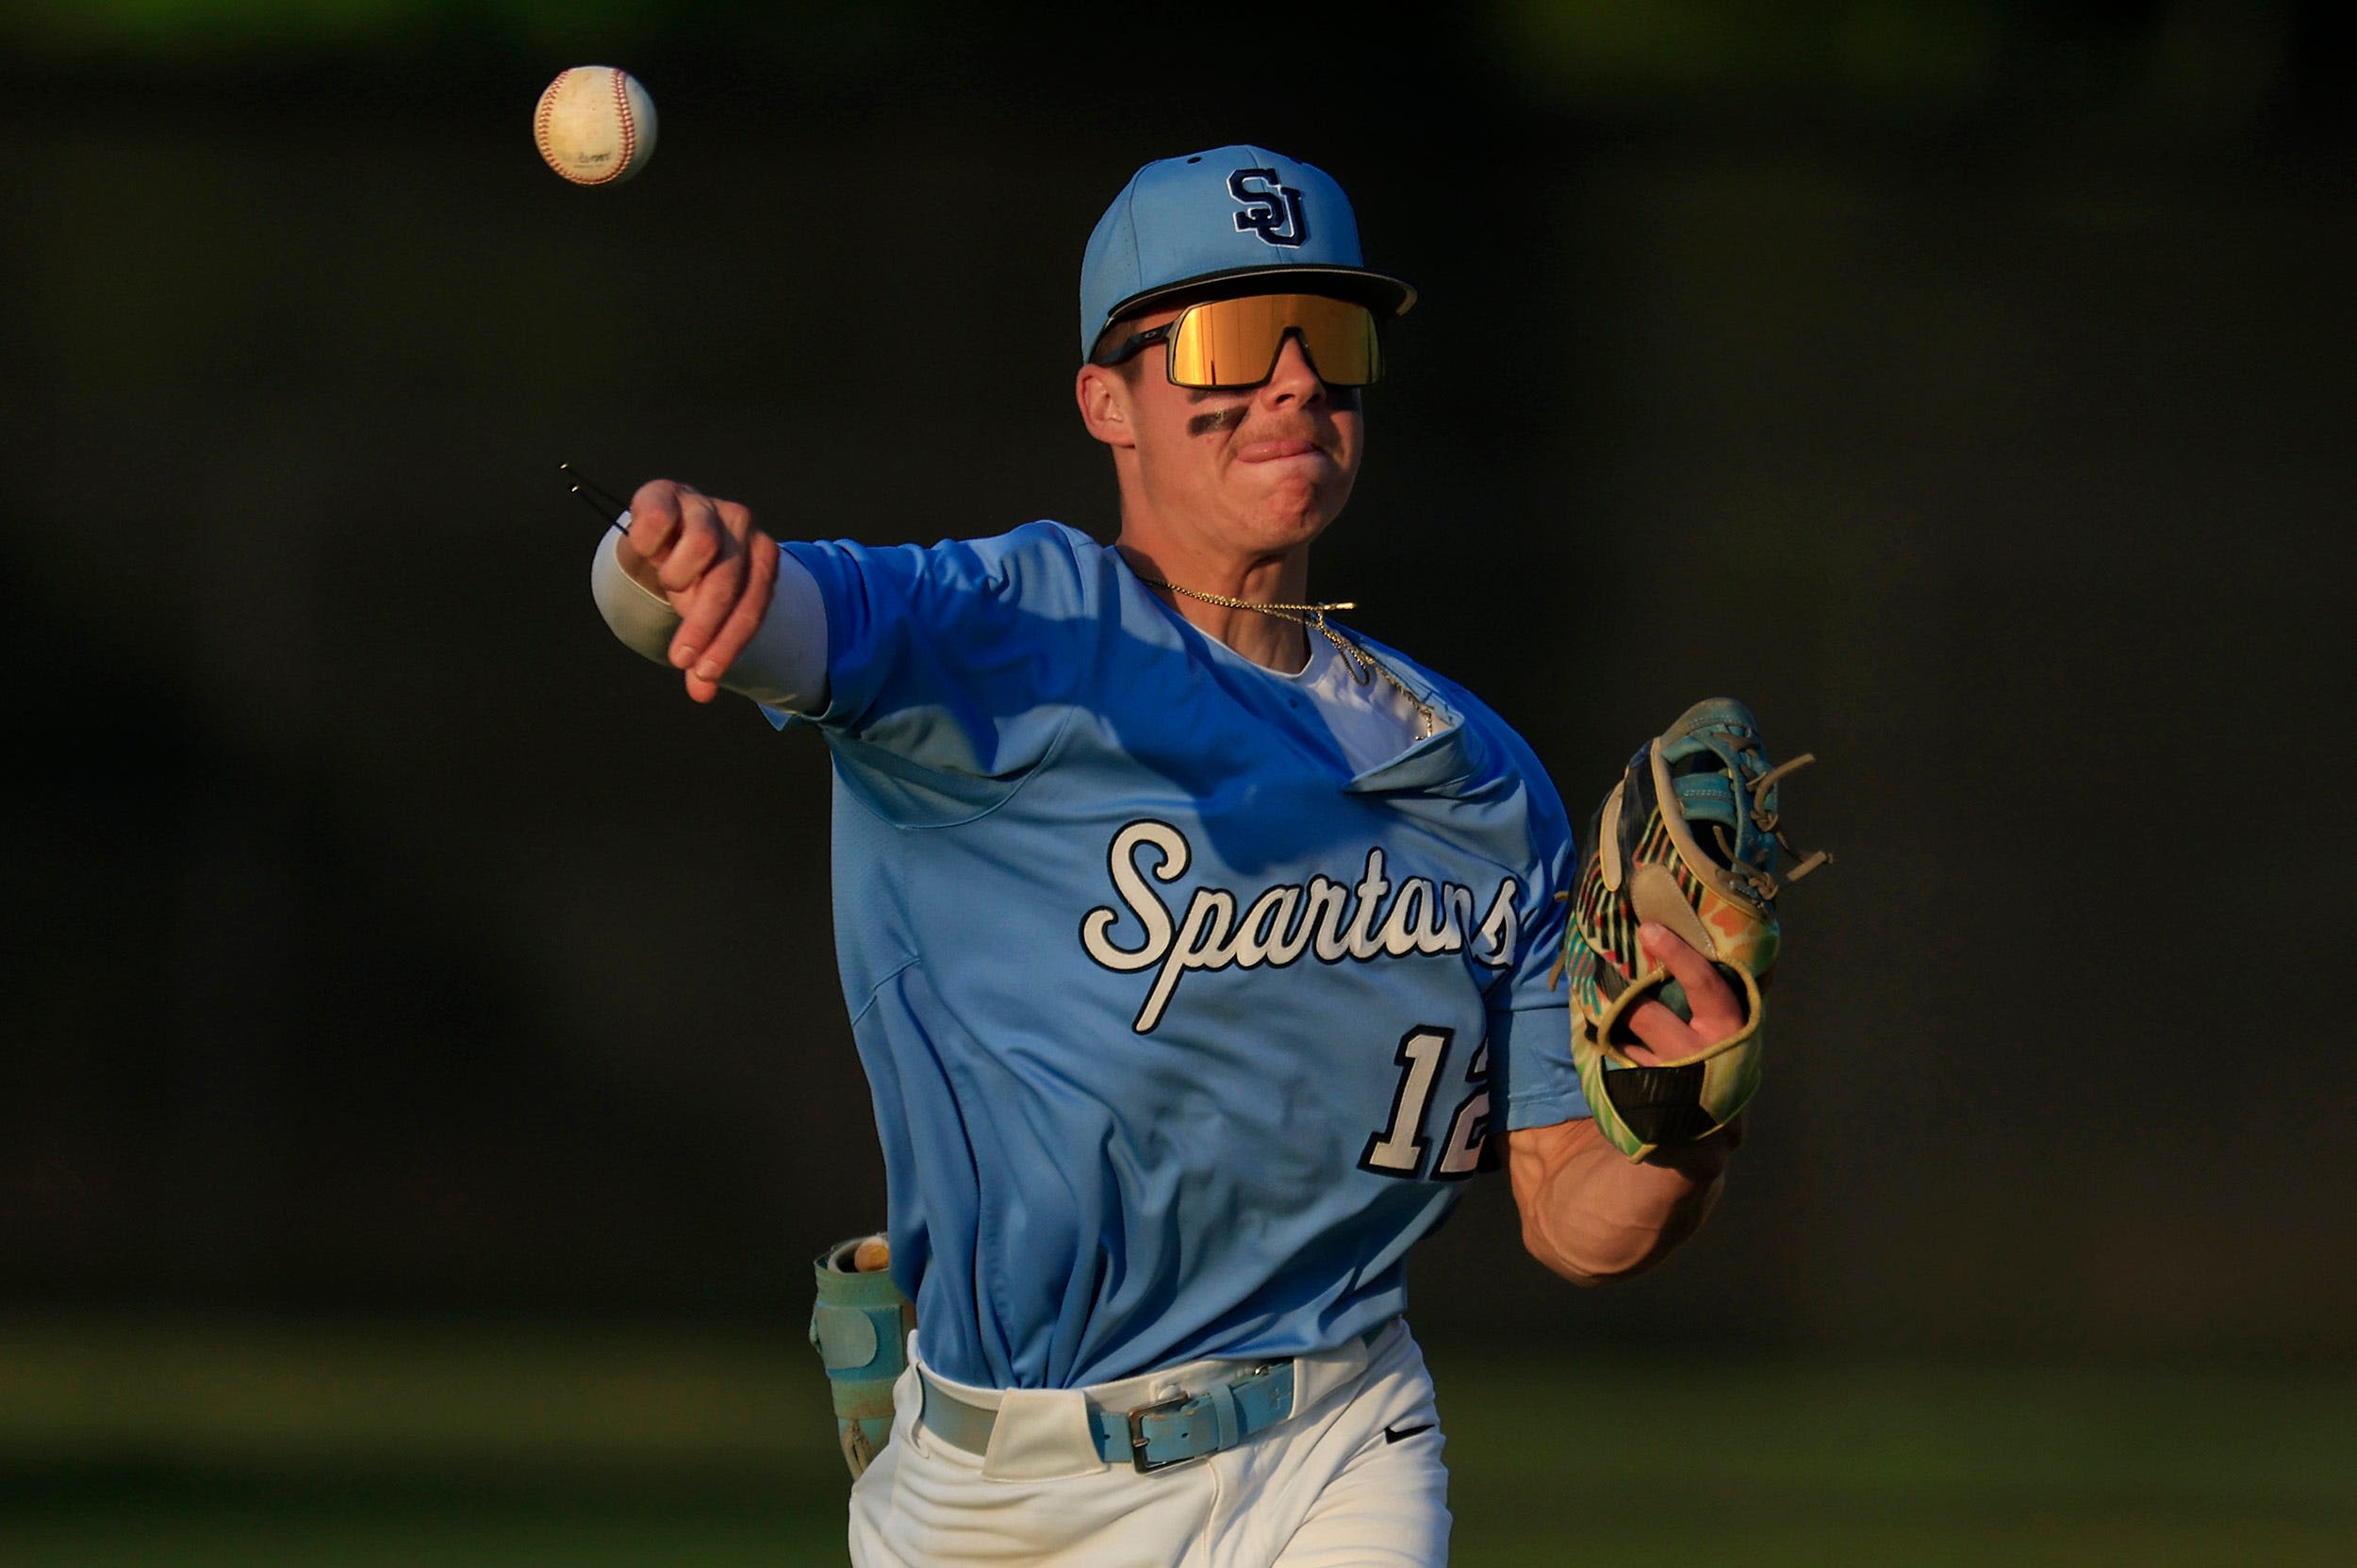 SPARTANS' SPRINT: St. Johns Country Day ends wait, wins FHSAA baseball title in extras